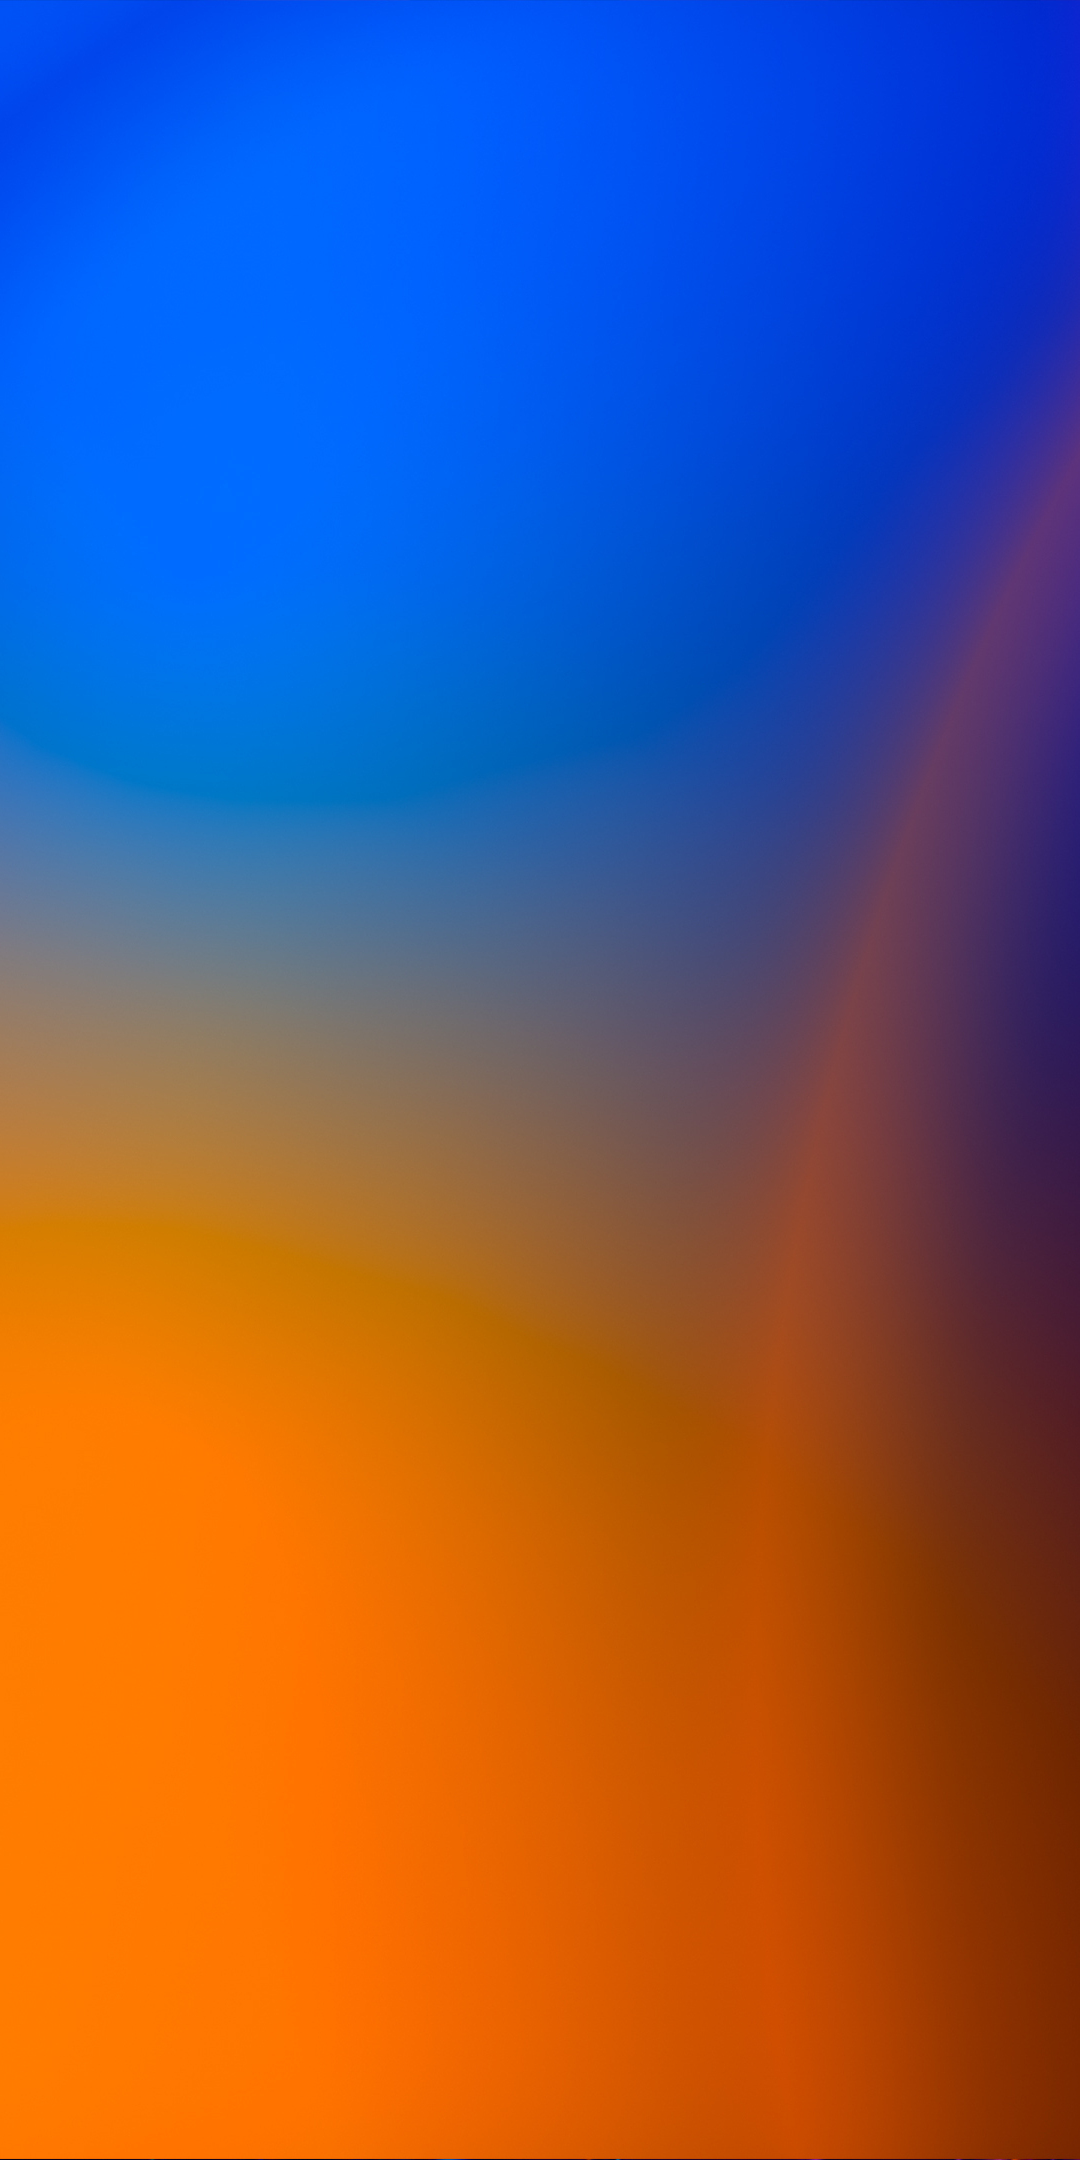 Blur, gradient, colorful, abstract, art, 1080x2160 wallpaper